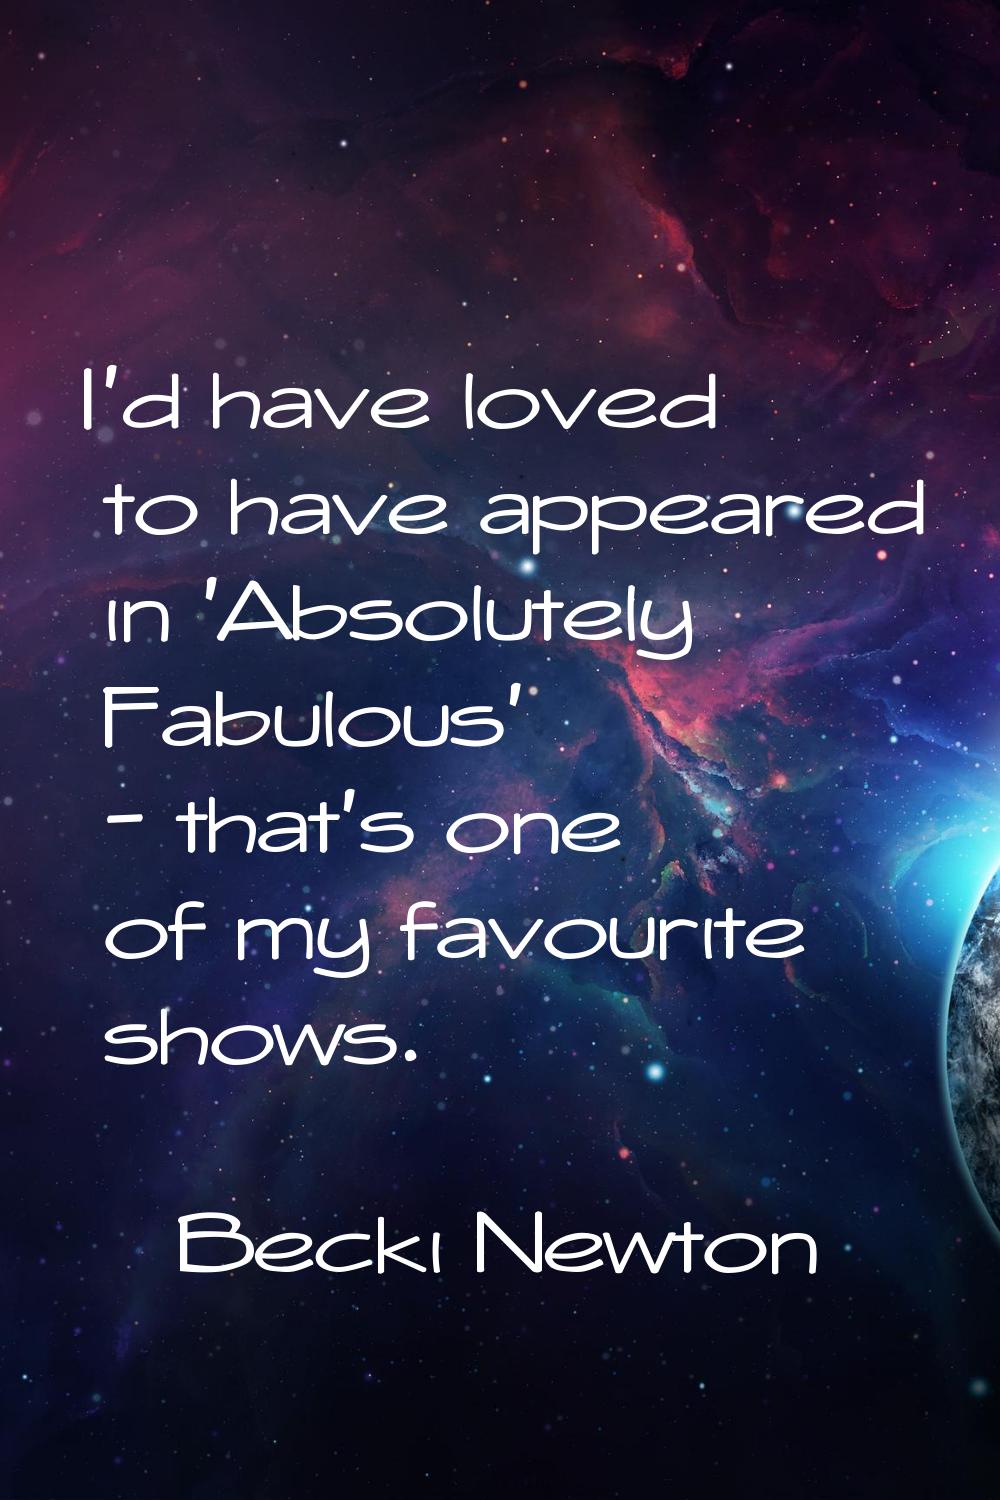 I'd have loved to have appeared in 'Absolutely Fabulous' - that's one of my favourite shows.